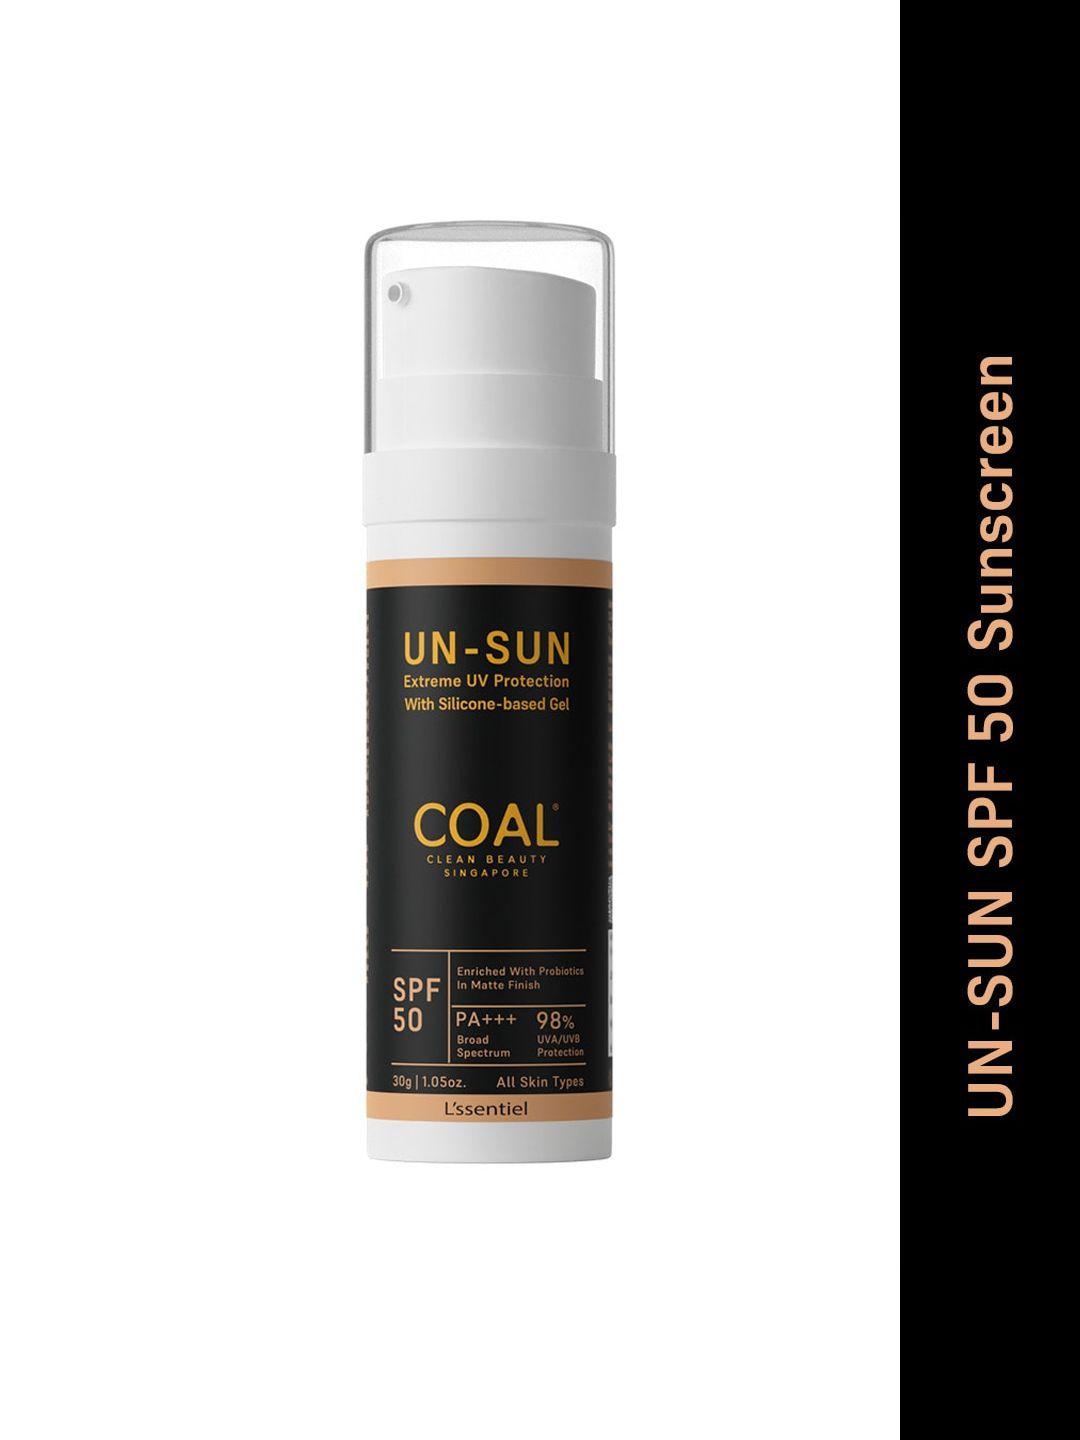 coal clean beauty un-sun spf 50 pa+++ sunscreen for extreme uv protection - 30g